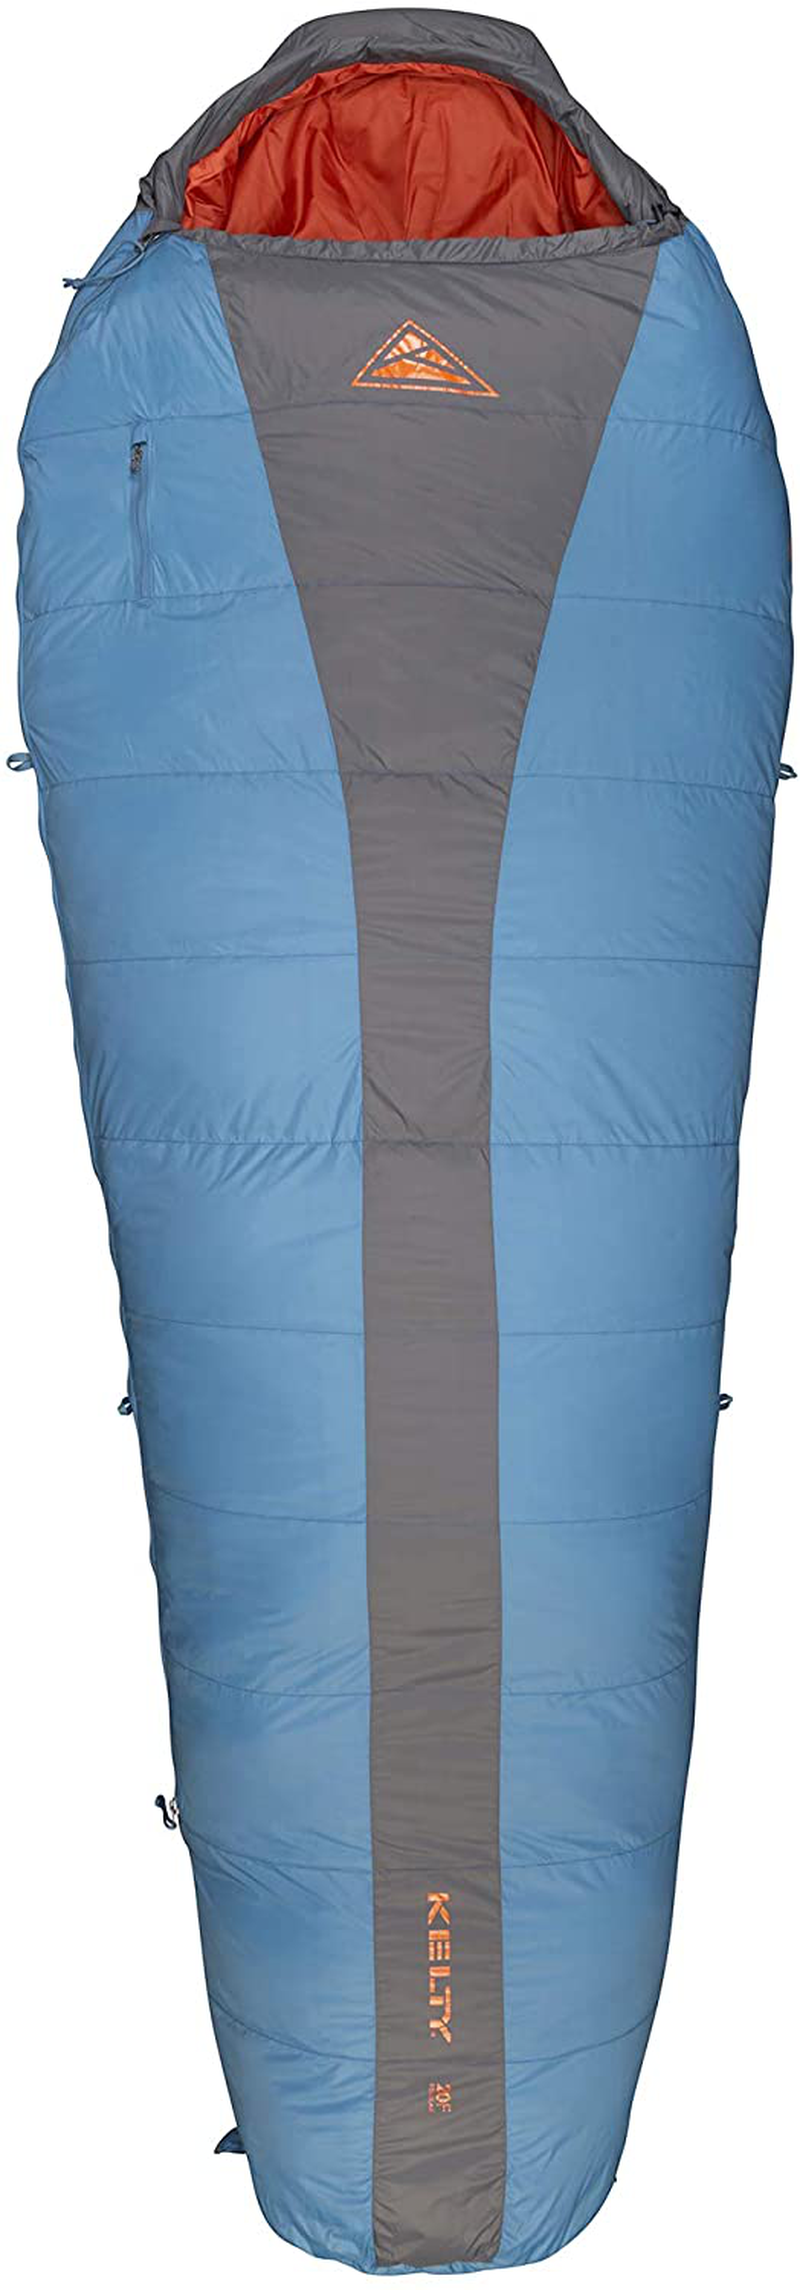 Kelty Cosmic 20 Degree down Sleeping Bag - Ultralight Backpacking Camping Sleeping Bag with Stuff Sack Sporting Goods > Outdoor Recreation > Camping & Hiking > Sleeping BagsSporting Goods > Outdoor Recreation > Camping & Hiking > Sleeping Bags Kelty Blue Regular 